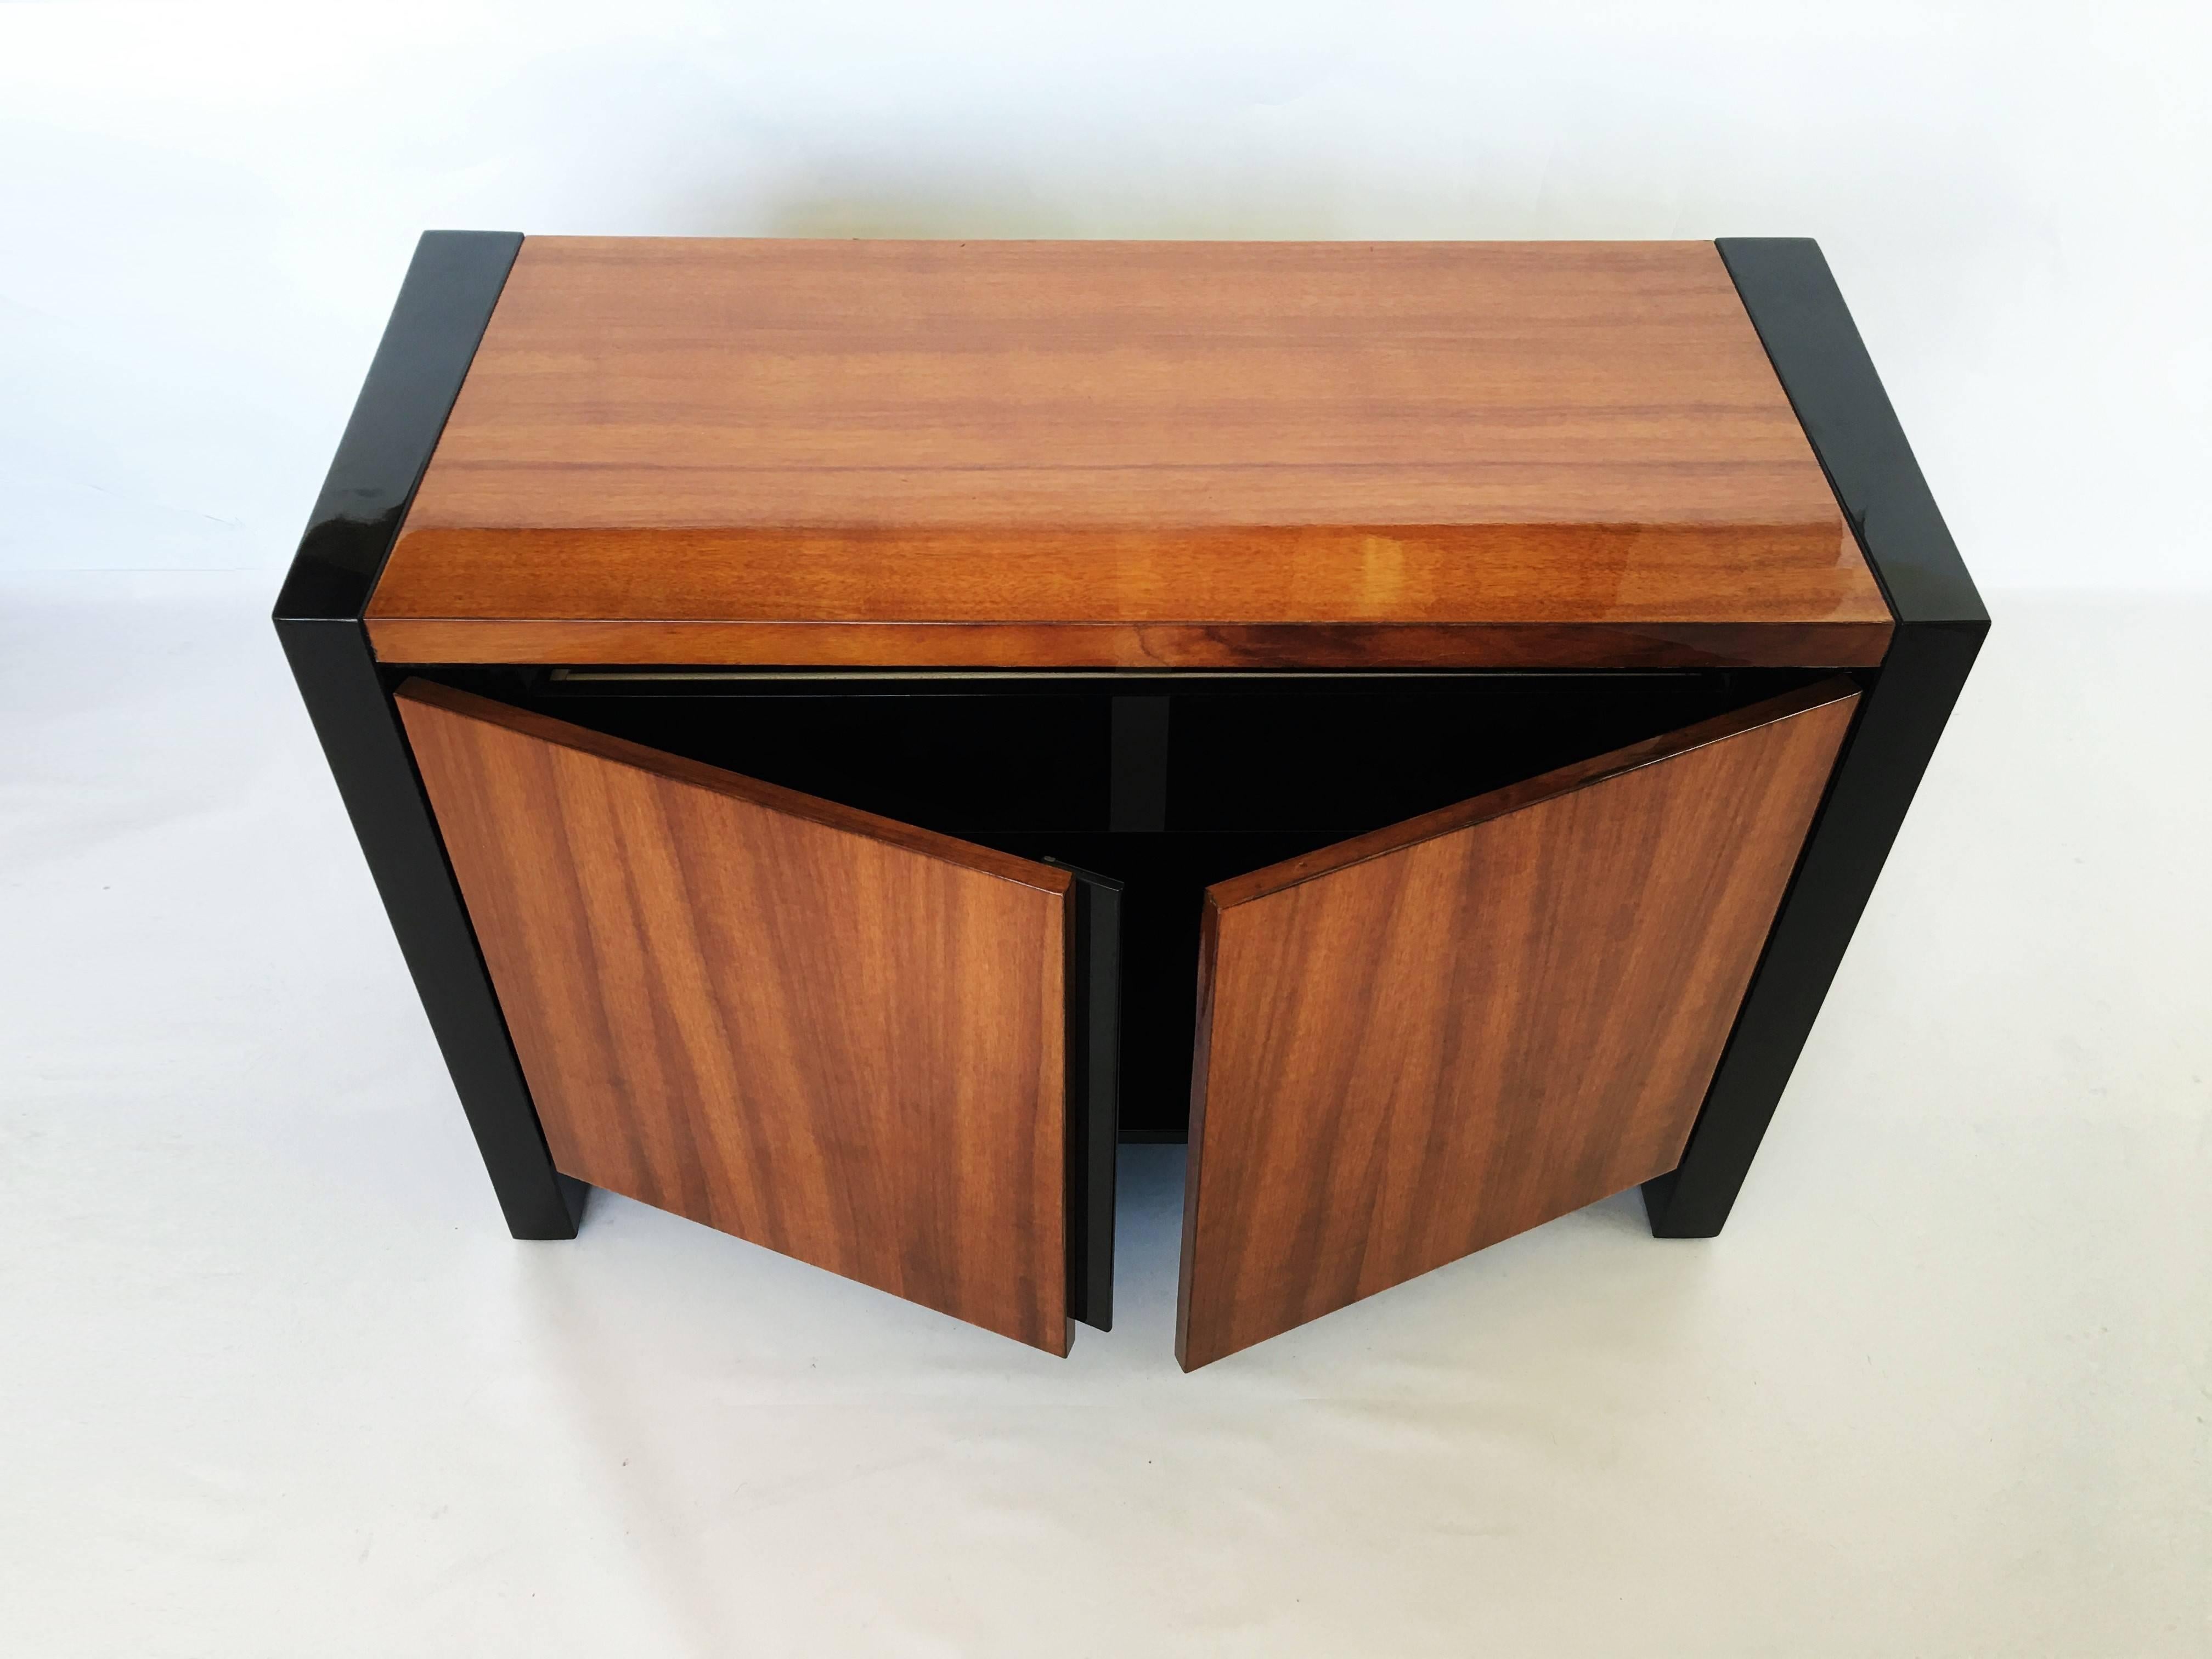 Pair of Black Lacquer and Koa Wood Nightstands by Henredon For Sale 2